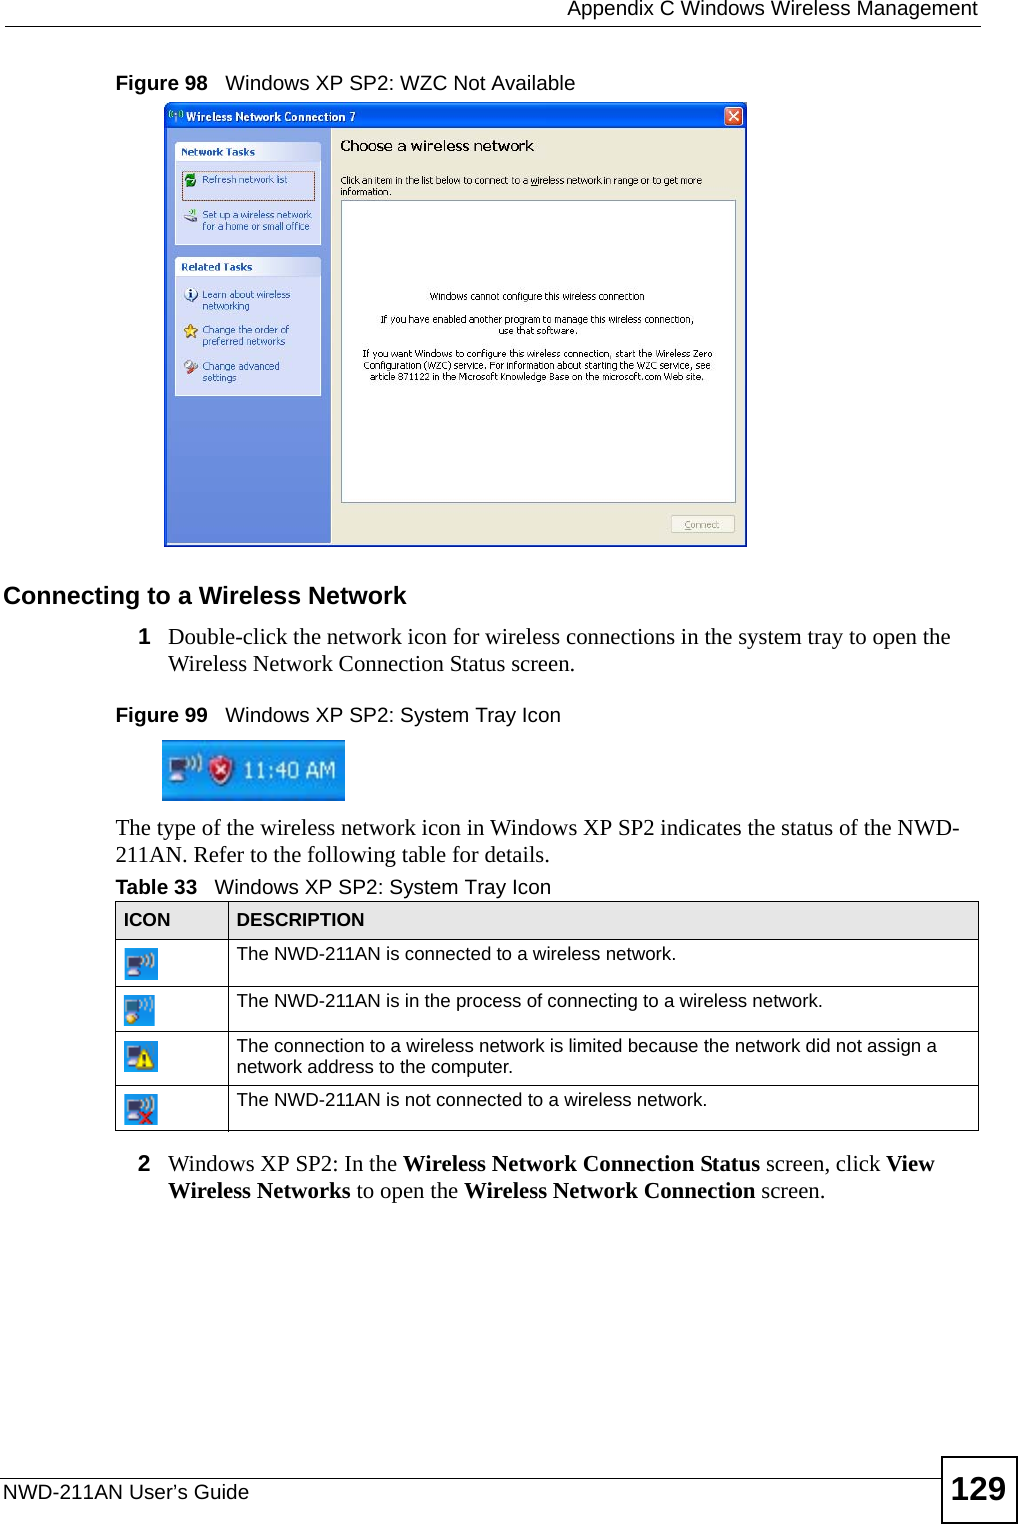  Appendix C Windows Wireless ManagementNWD-211AN User’s Guide 129Figure 98   Windows XP SP2: WZC Not AvailableConnecting to a Wireless Network 1Double-click the network icon for wireless connections in the system tray to open the Wireless Network Connection Status screen.Figure 99   Windows XP SP2: System Tray IconThe type of the wireless network icon in Windows XP SP2 indicates the status of the NWD-211AN. Refer to the following table for details.2Windows XP SP2: In the Wireless Network Connection Status screen, click View Wireless Networks to open the Wireless Network Connection screen.Table 33   Windows XP SP2: System Tray IconICON DESCRIPTIONThe NWD-211AN is connected to a wireless network.The NWD-211AN is in the process of connecting to a wireless network.The connection to a wireless network is limited because the network did not assign a network address to the computer.The NWD-211AN is not connected to a wireless network.